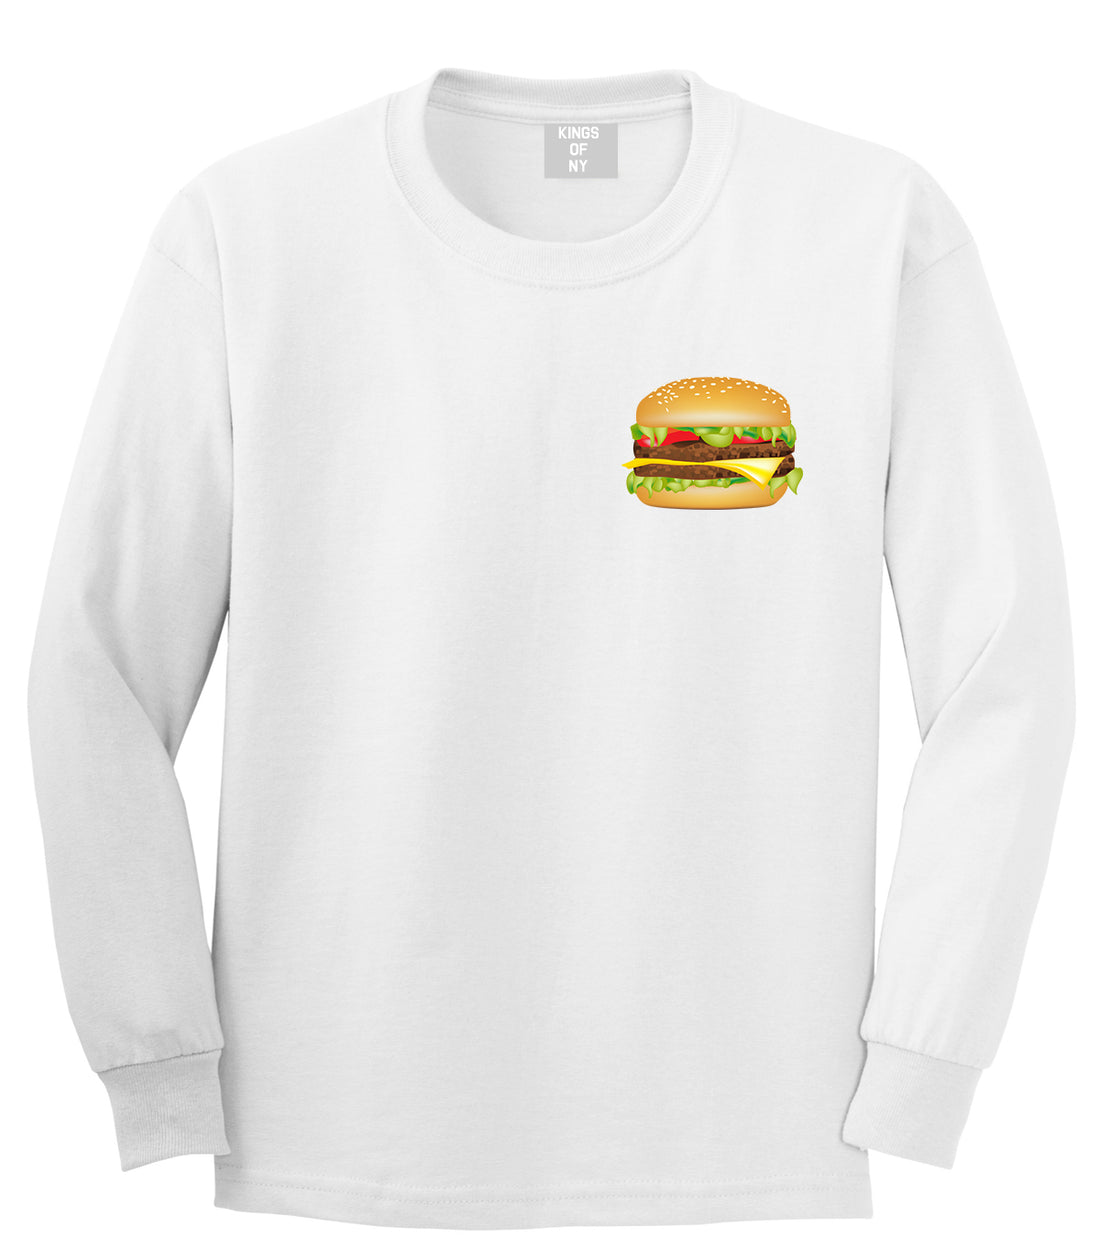 Burger Chest White Long Sleeve T-Shirt by Kings Of NY